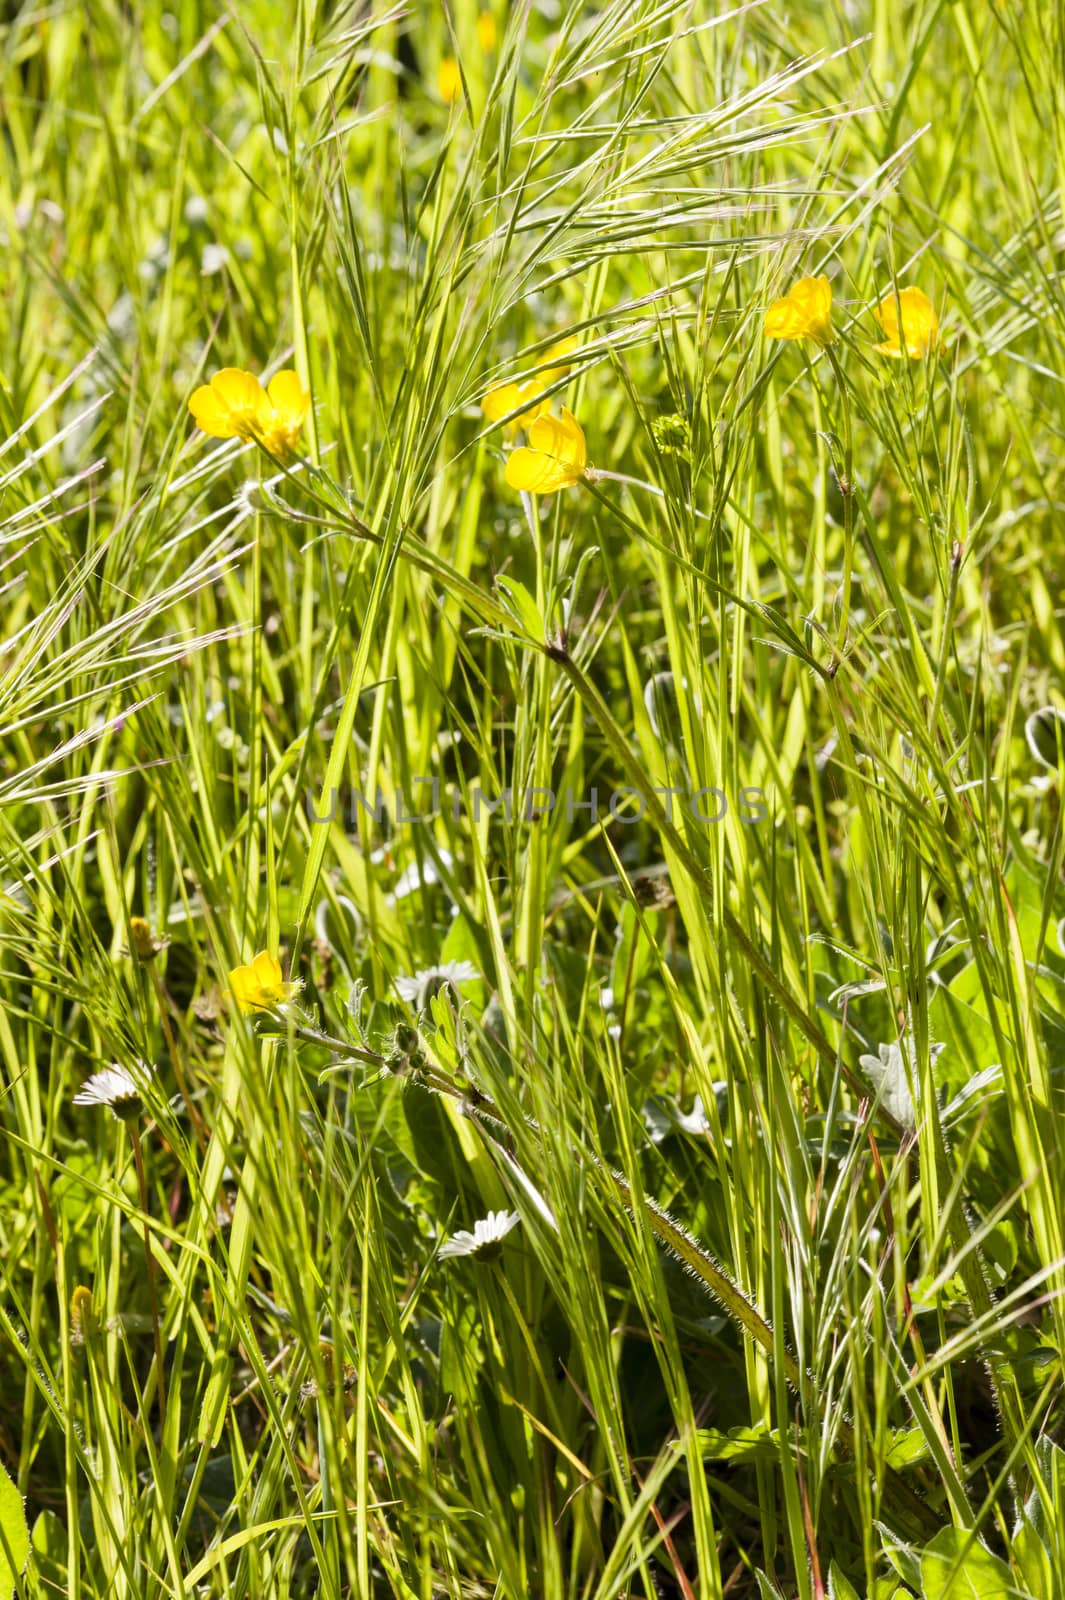 Spring bloom of yellow and white flowers in a green grass